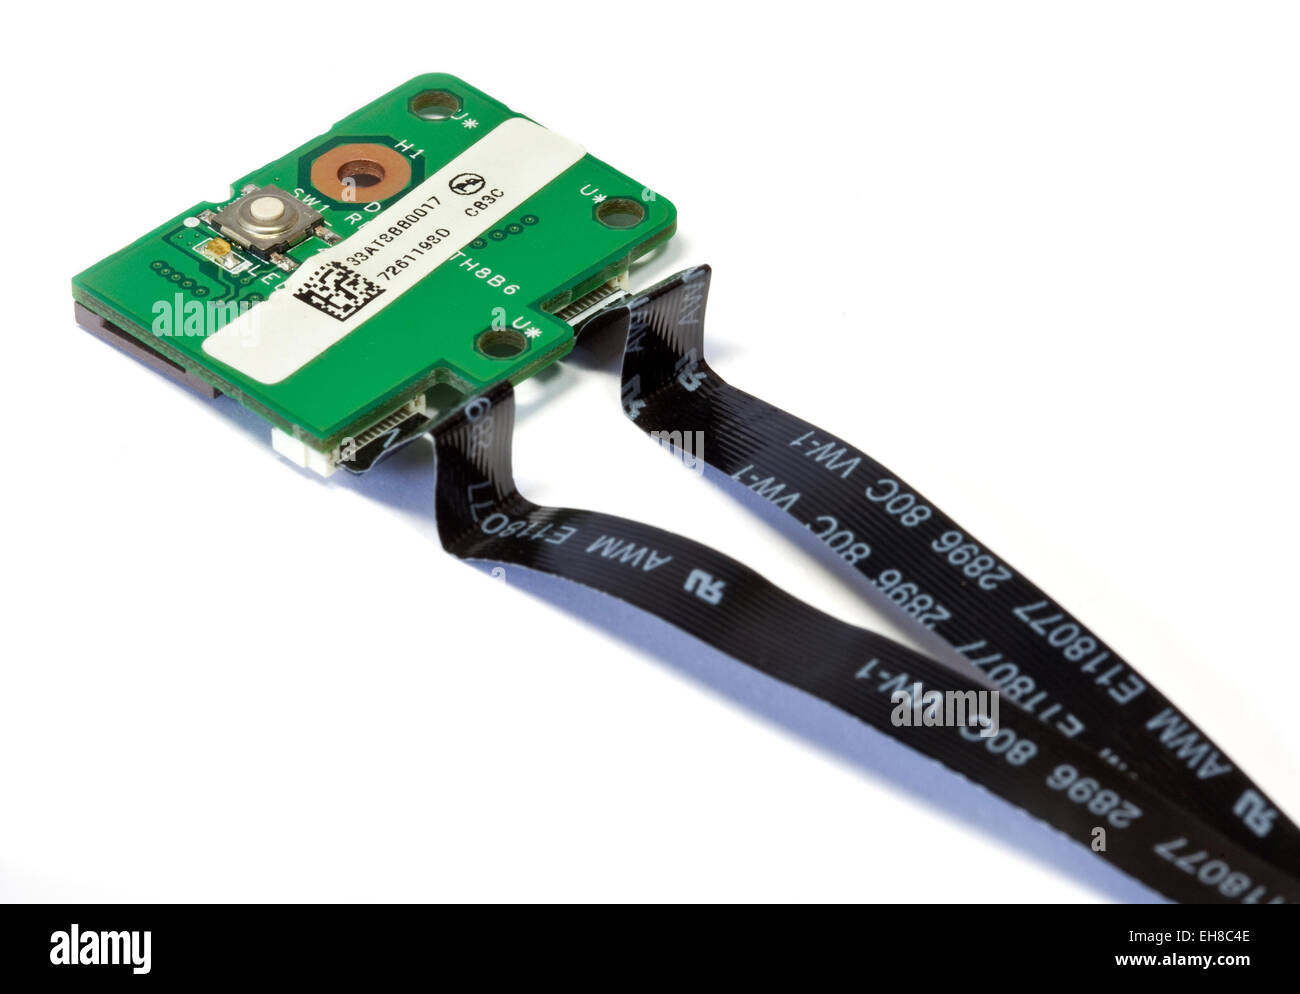 Flex Cable Interface Card used in Laptop Computer Stock Photo